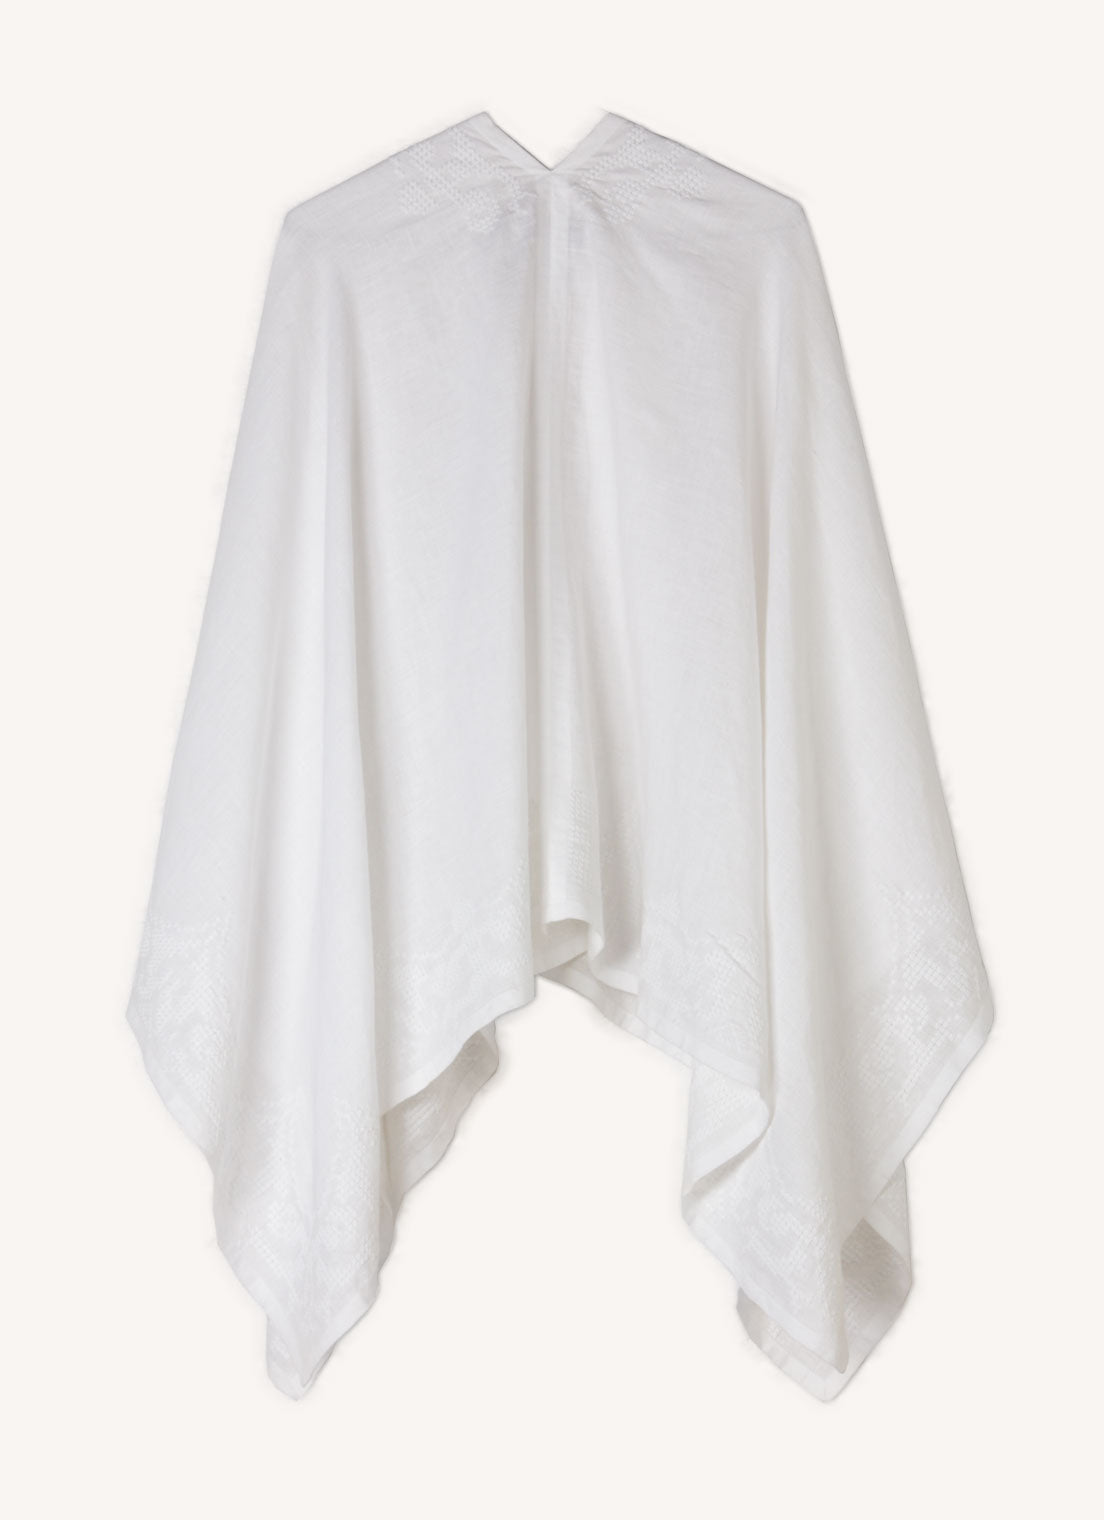 A one size, easy fit, white embroidered cape shawl made from European pure linen